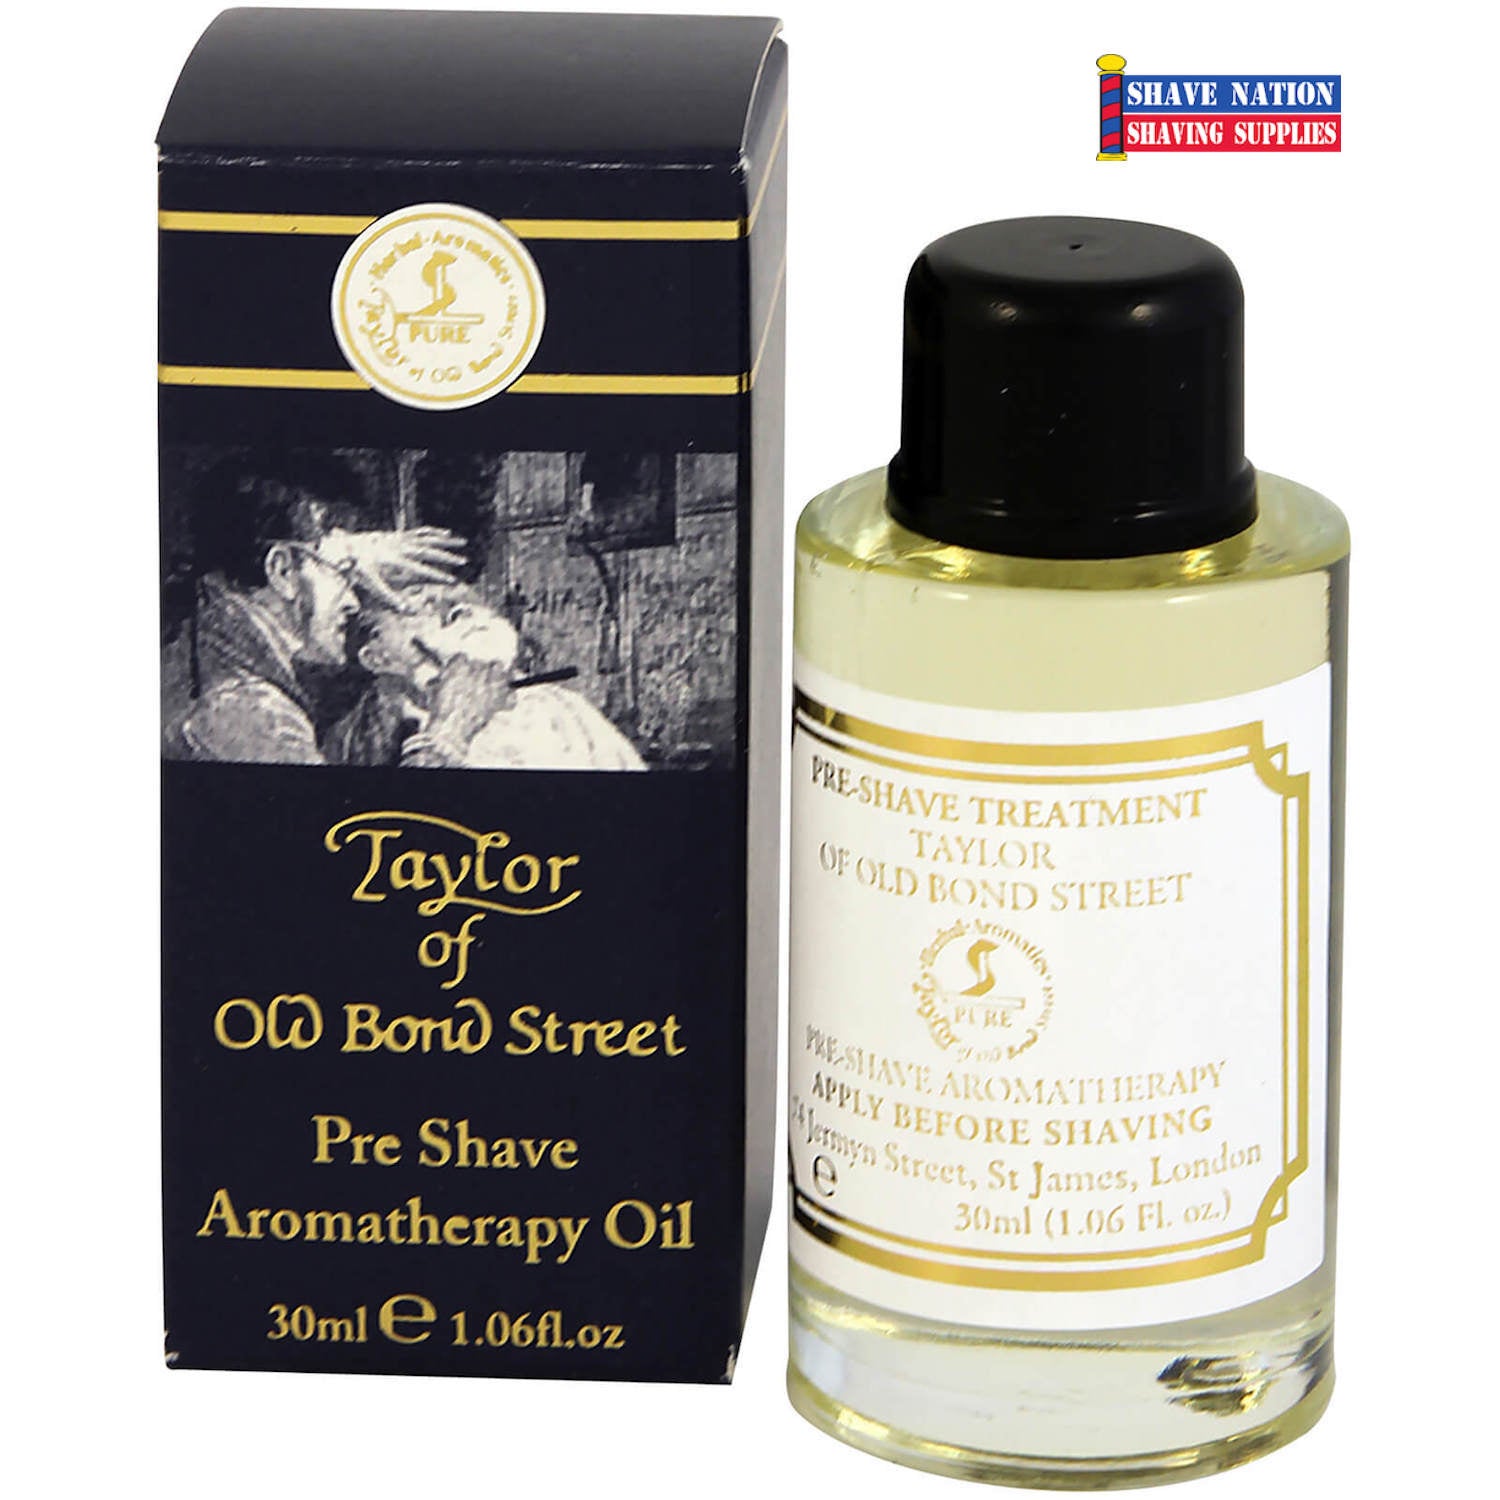 Taylor Shaving Shave Old Oil Street Aromatherapy of Preshave | Bond Supplies® Nation